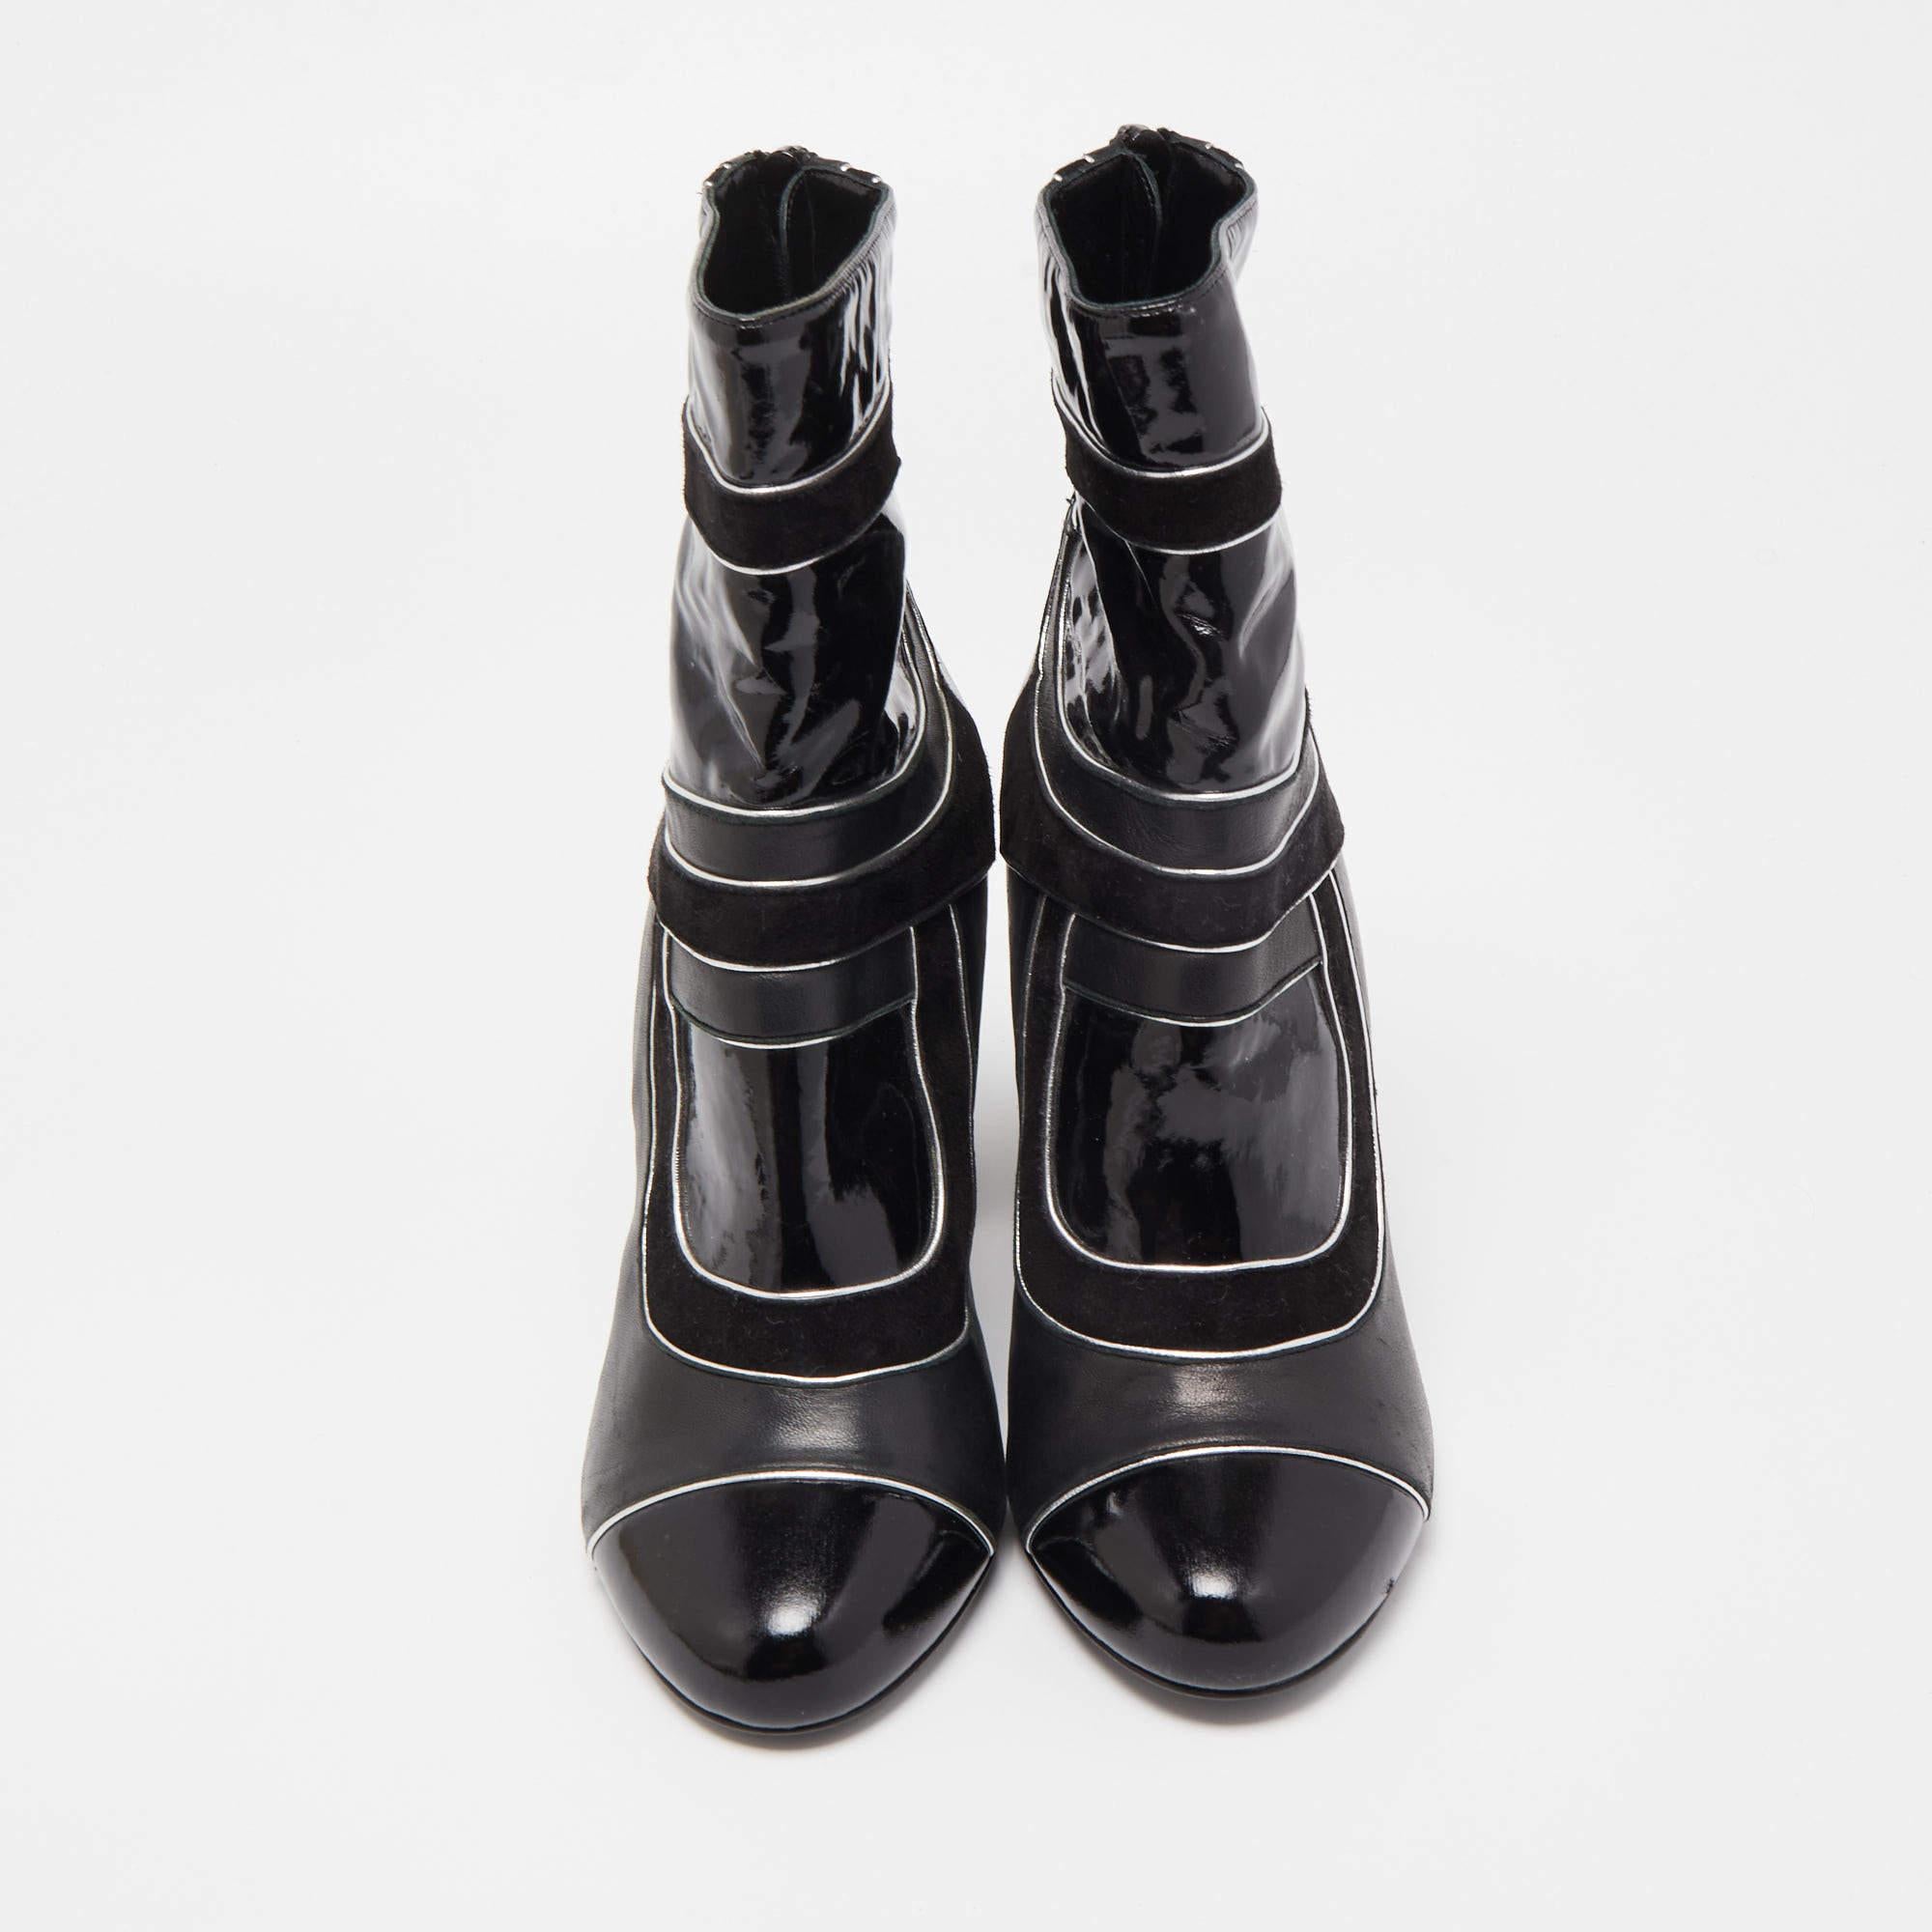 Pierre Hardy Black Patent and Leather Zip Up Ankle Boots Size 37 In Excellent Condition For Sale In Dubai, Al Qouz 2